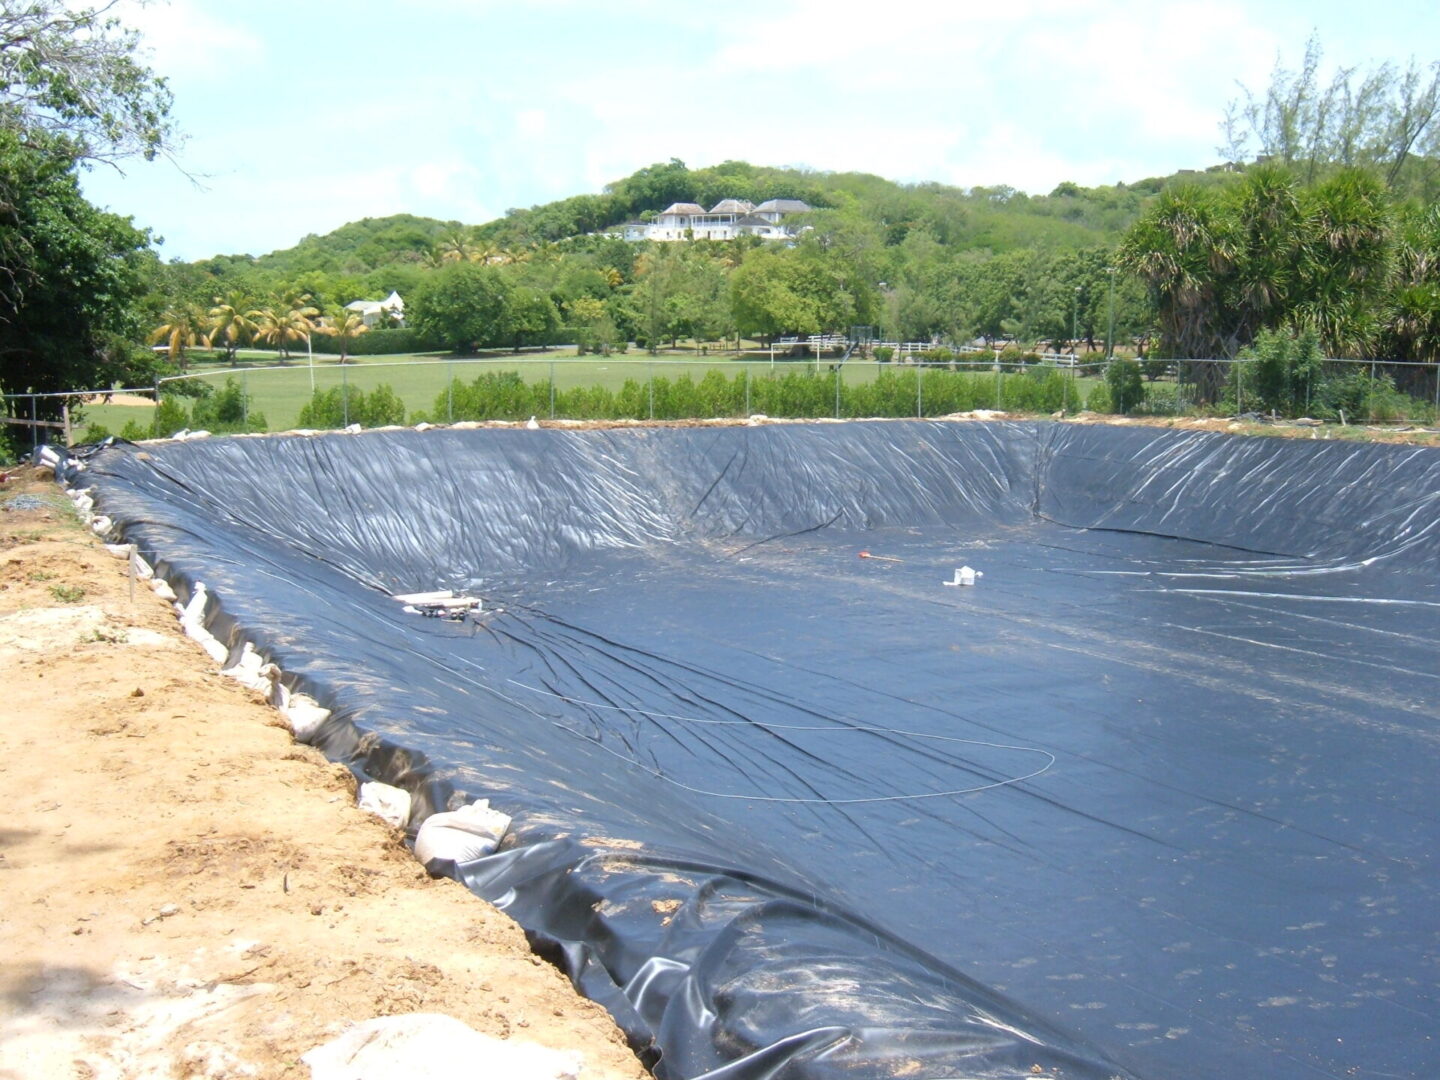 A large black tarp covering the ground.